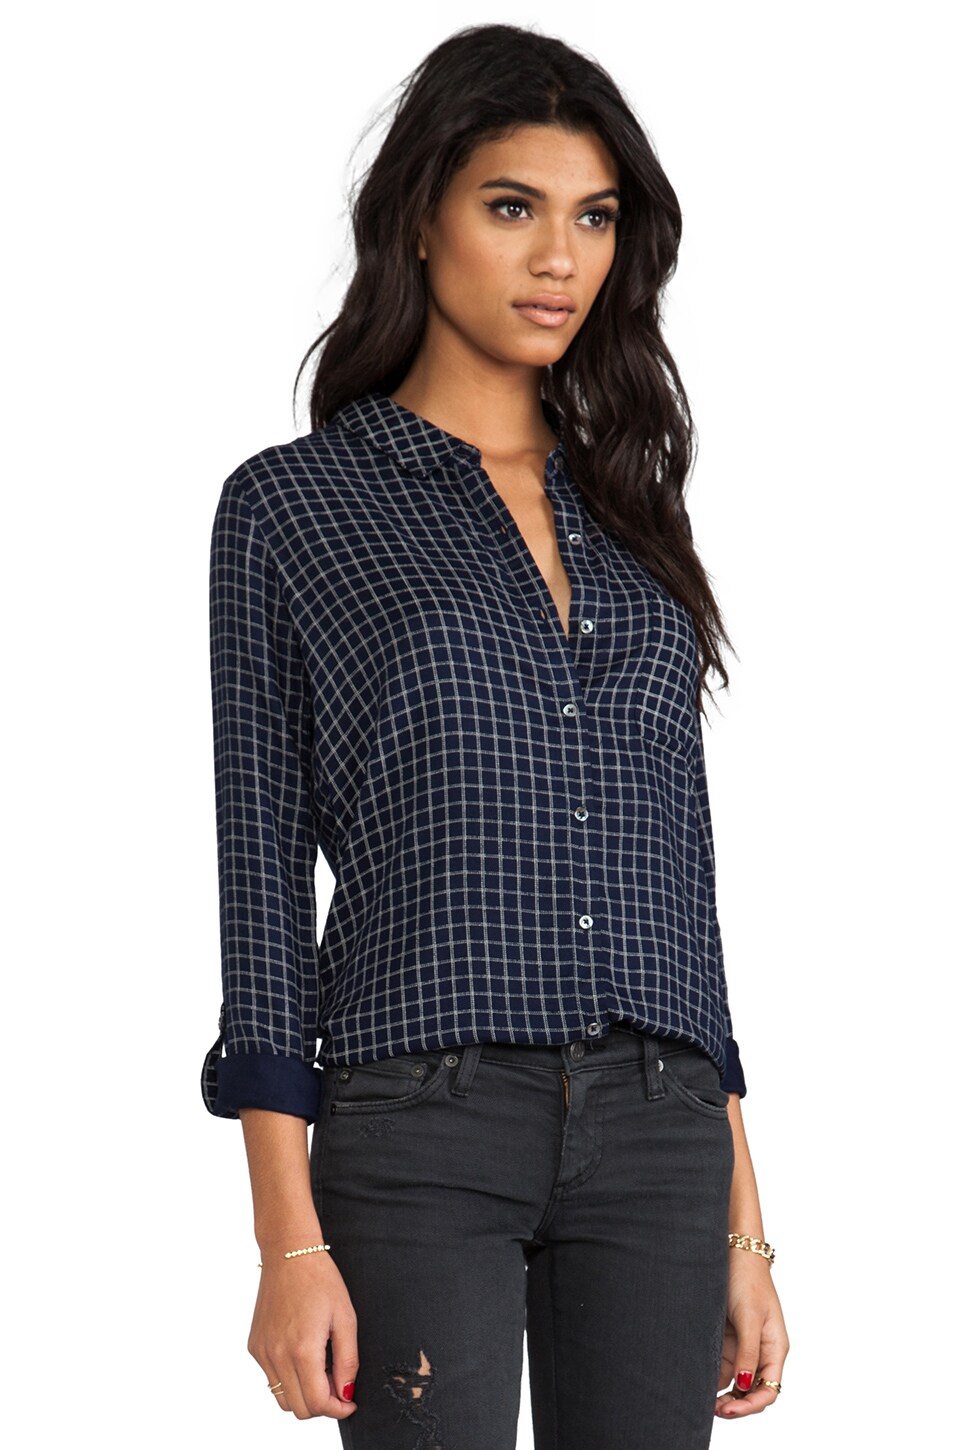 Soft Joie Anabella Plaid Button Down In Peacoat Revolve